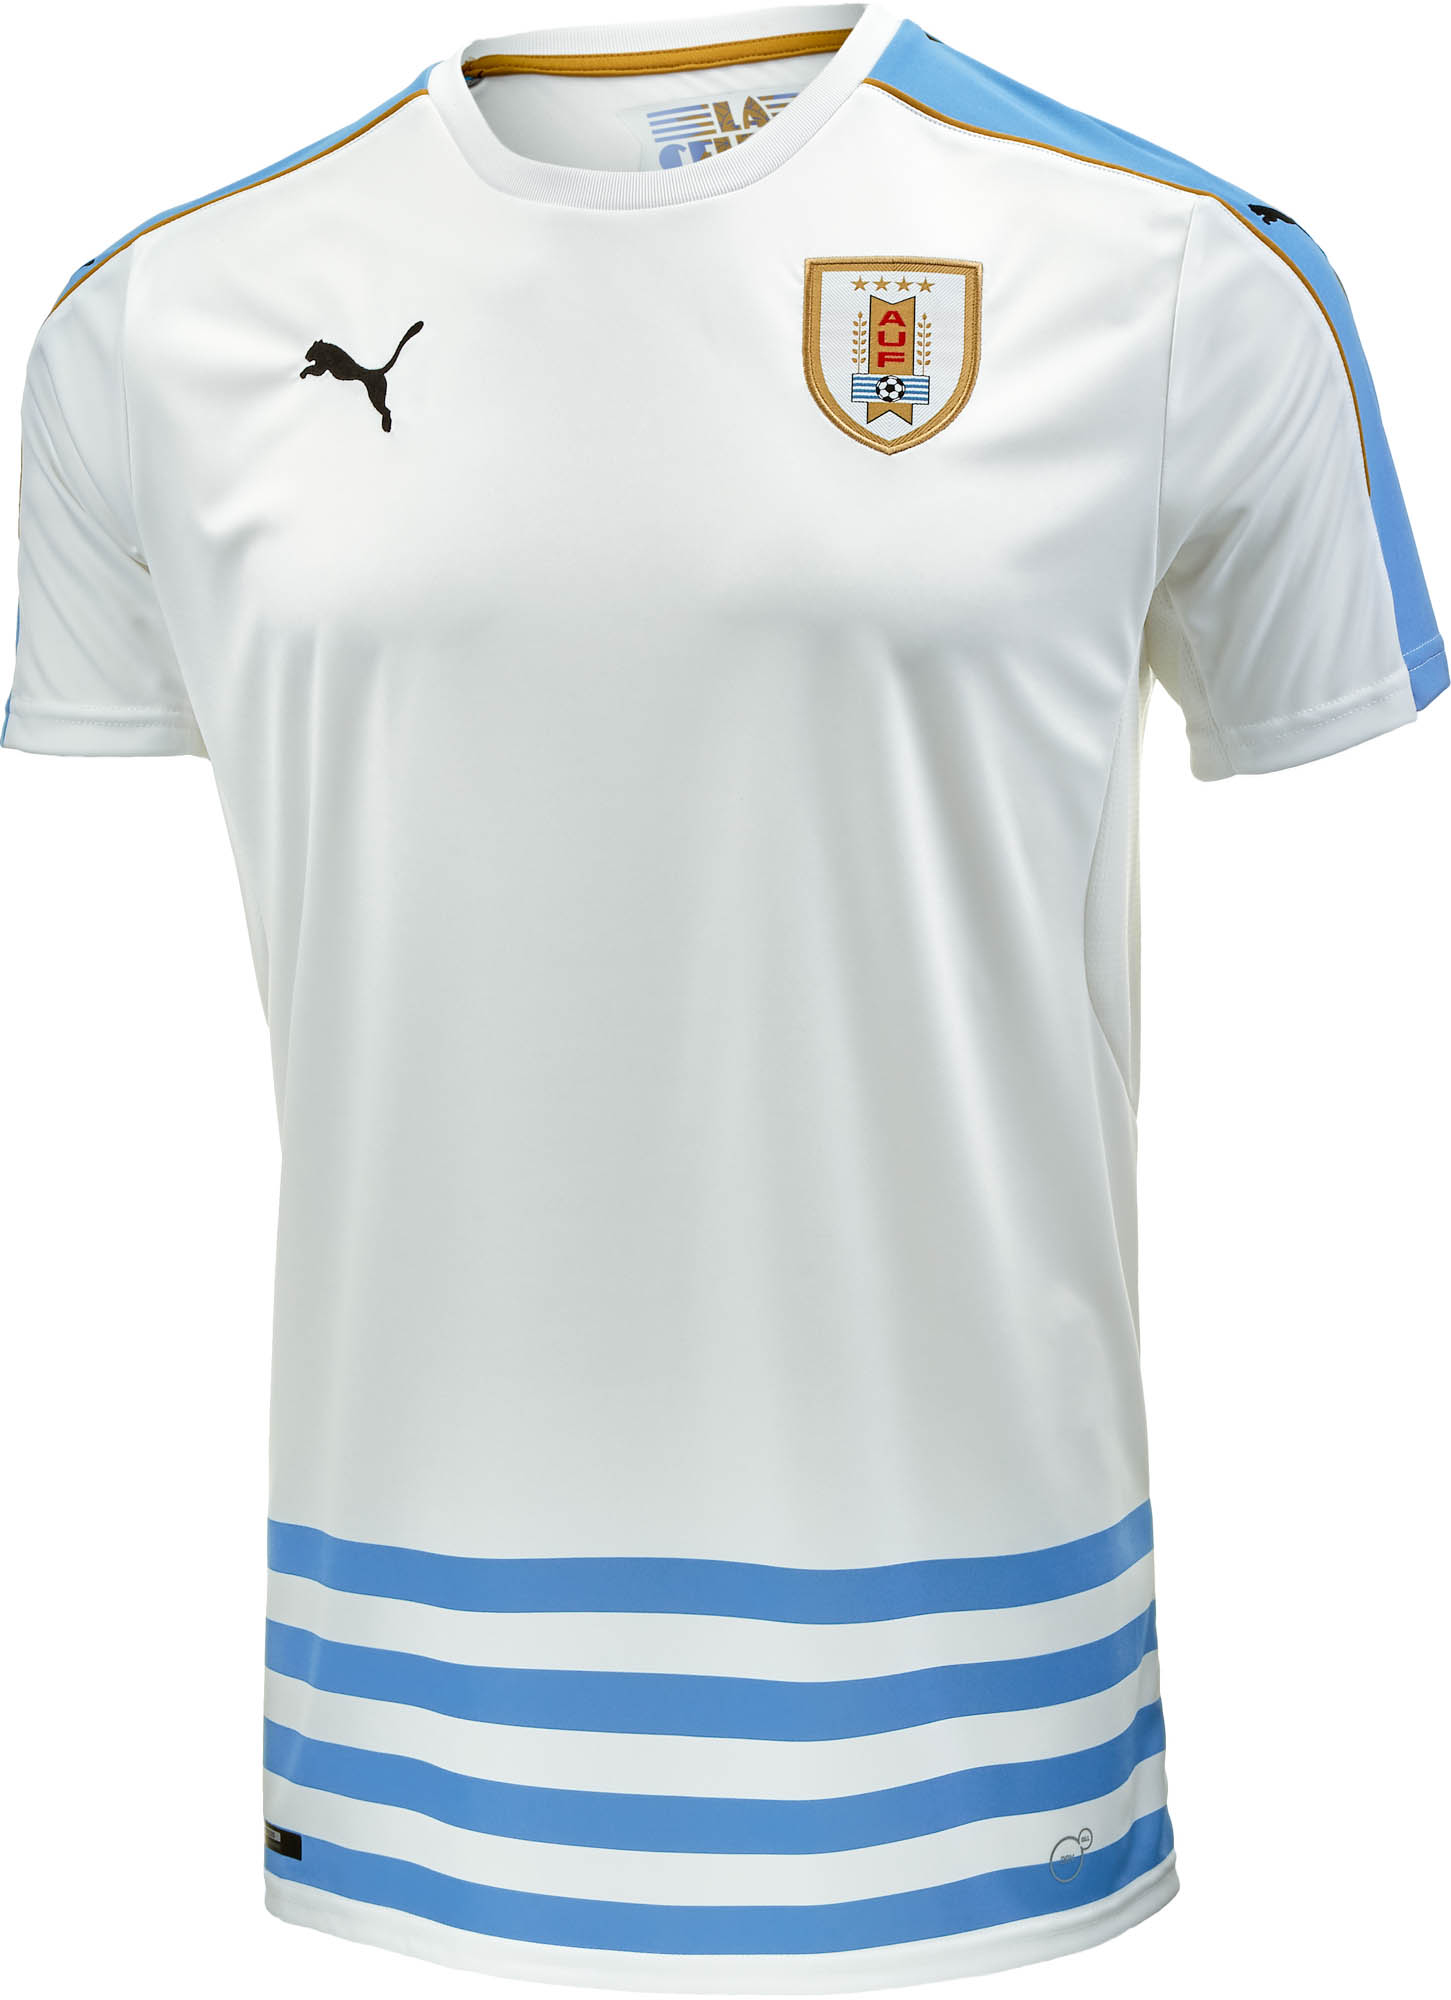 authentic uruguay soccer jersey